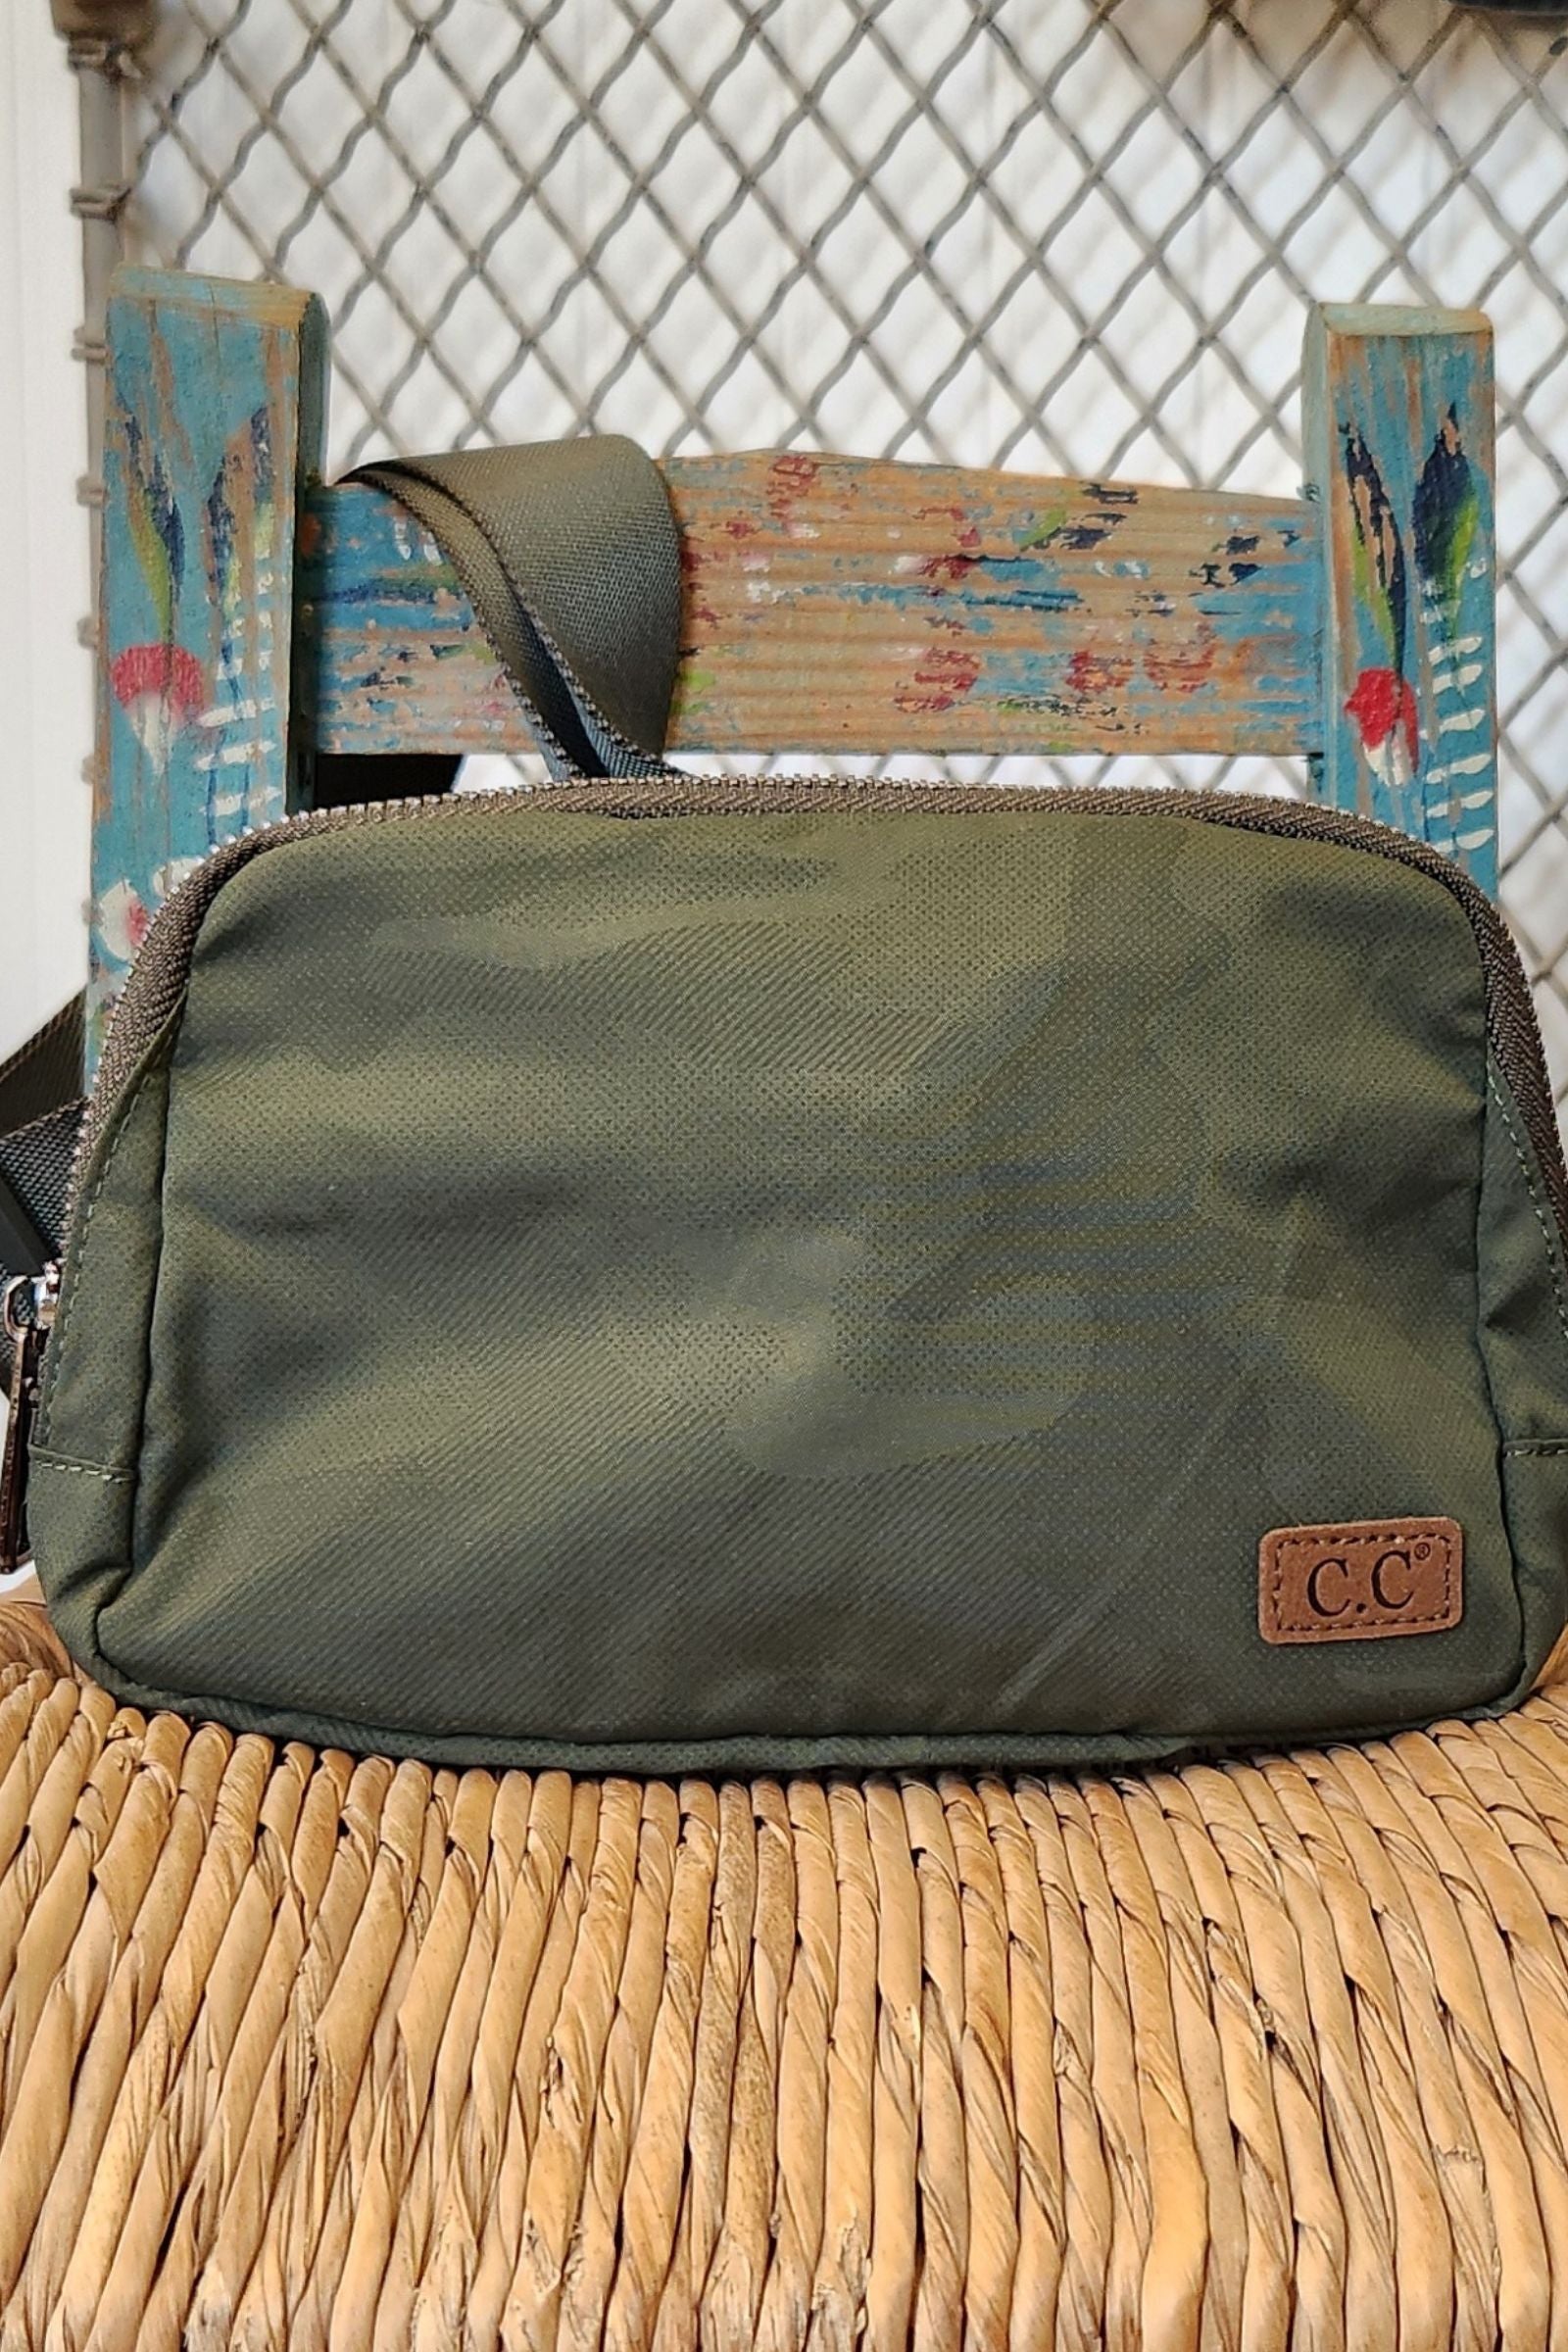 CC Olive Camo Fanny Pack